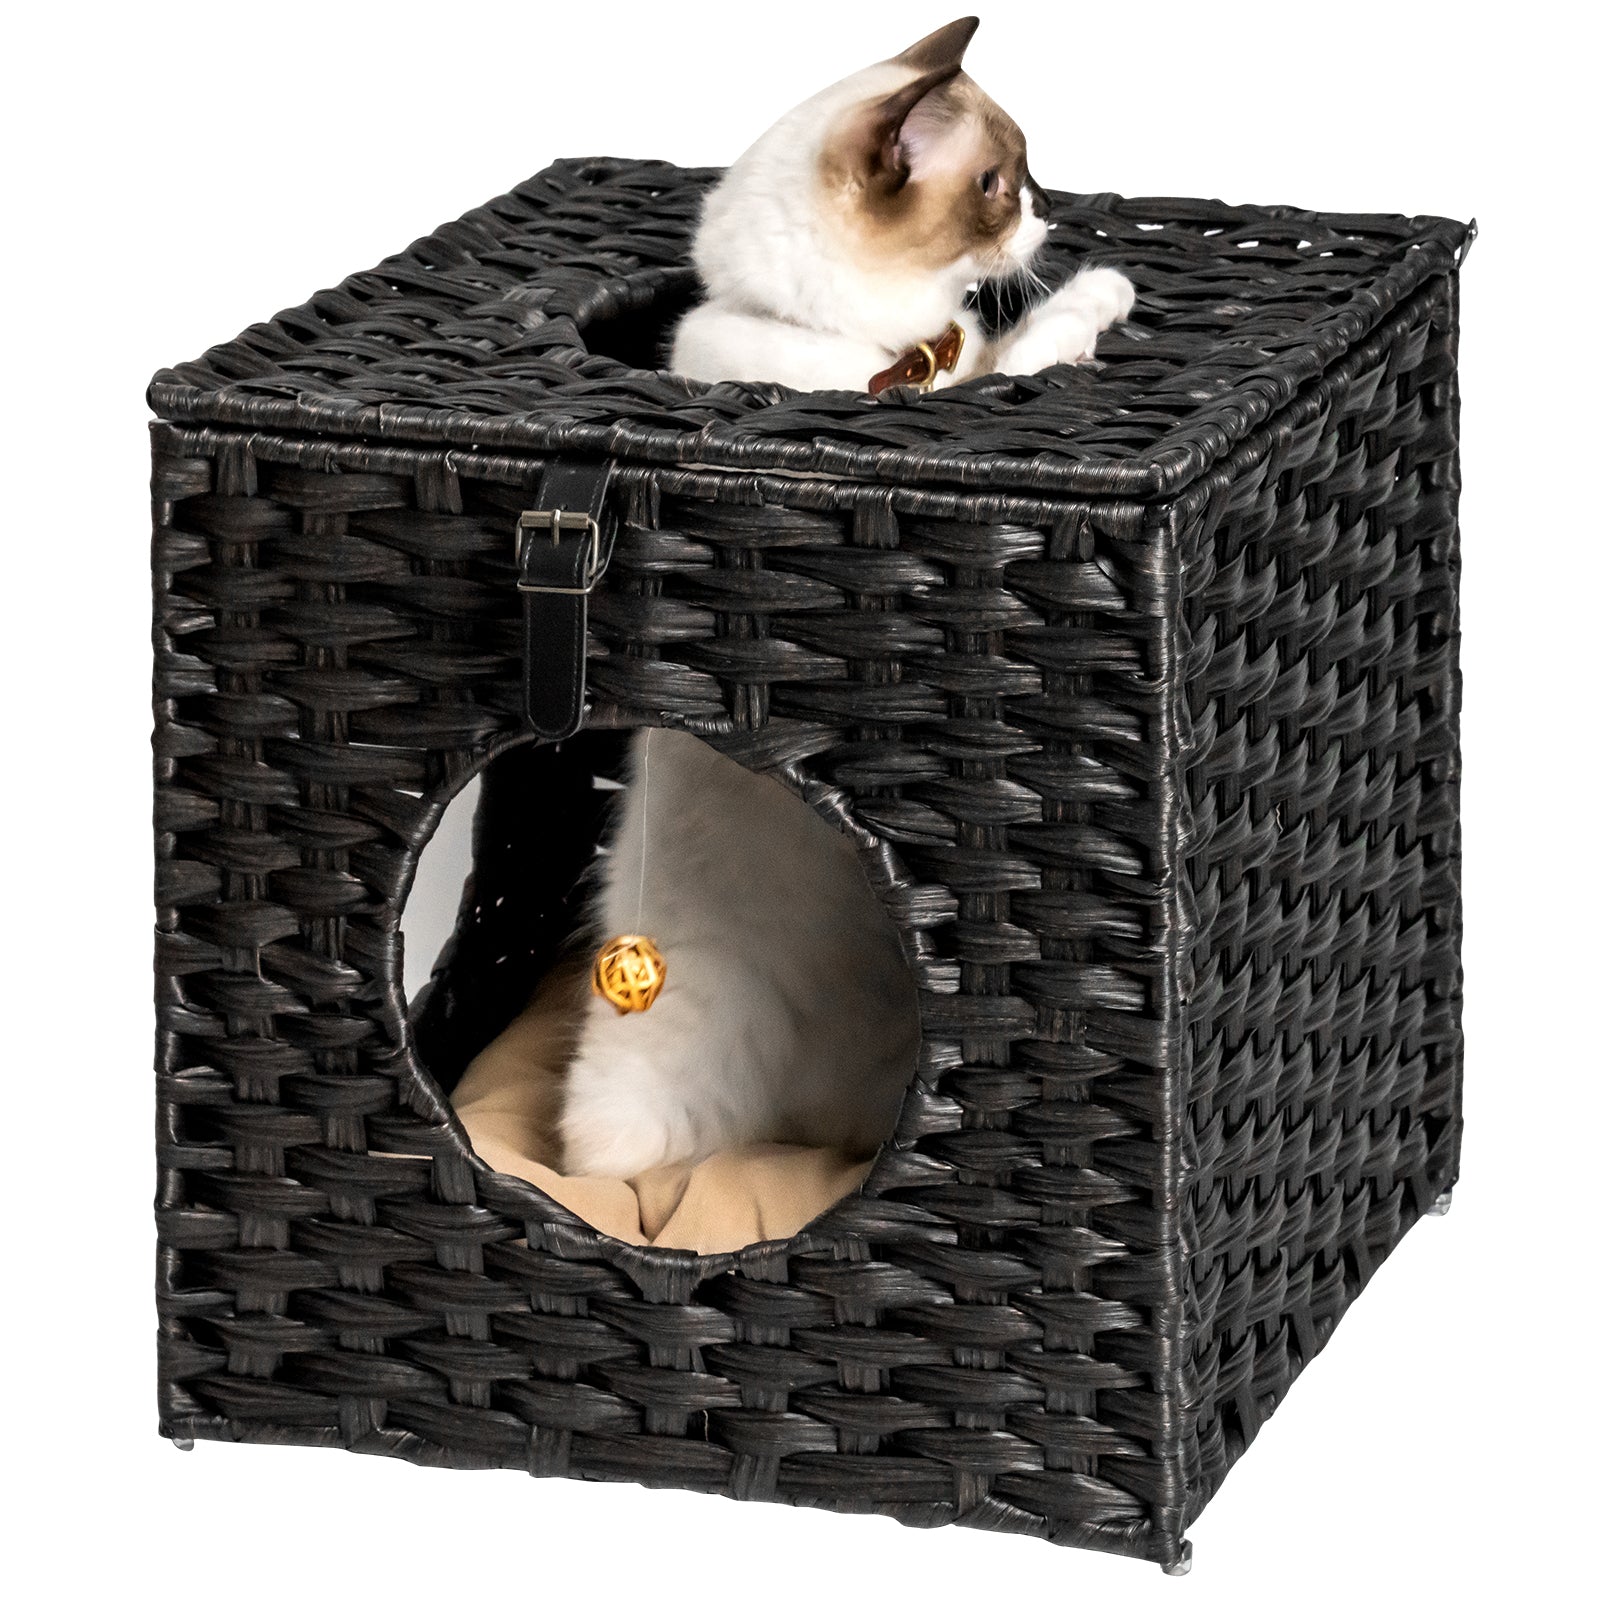 Rattan Cat Litter,Cat Bed with Rattan Ball and Cushion - Black